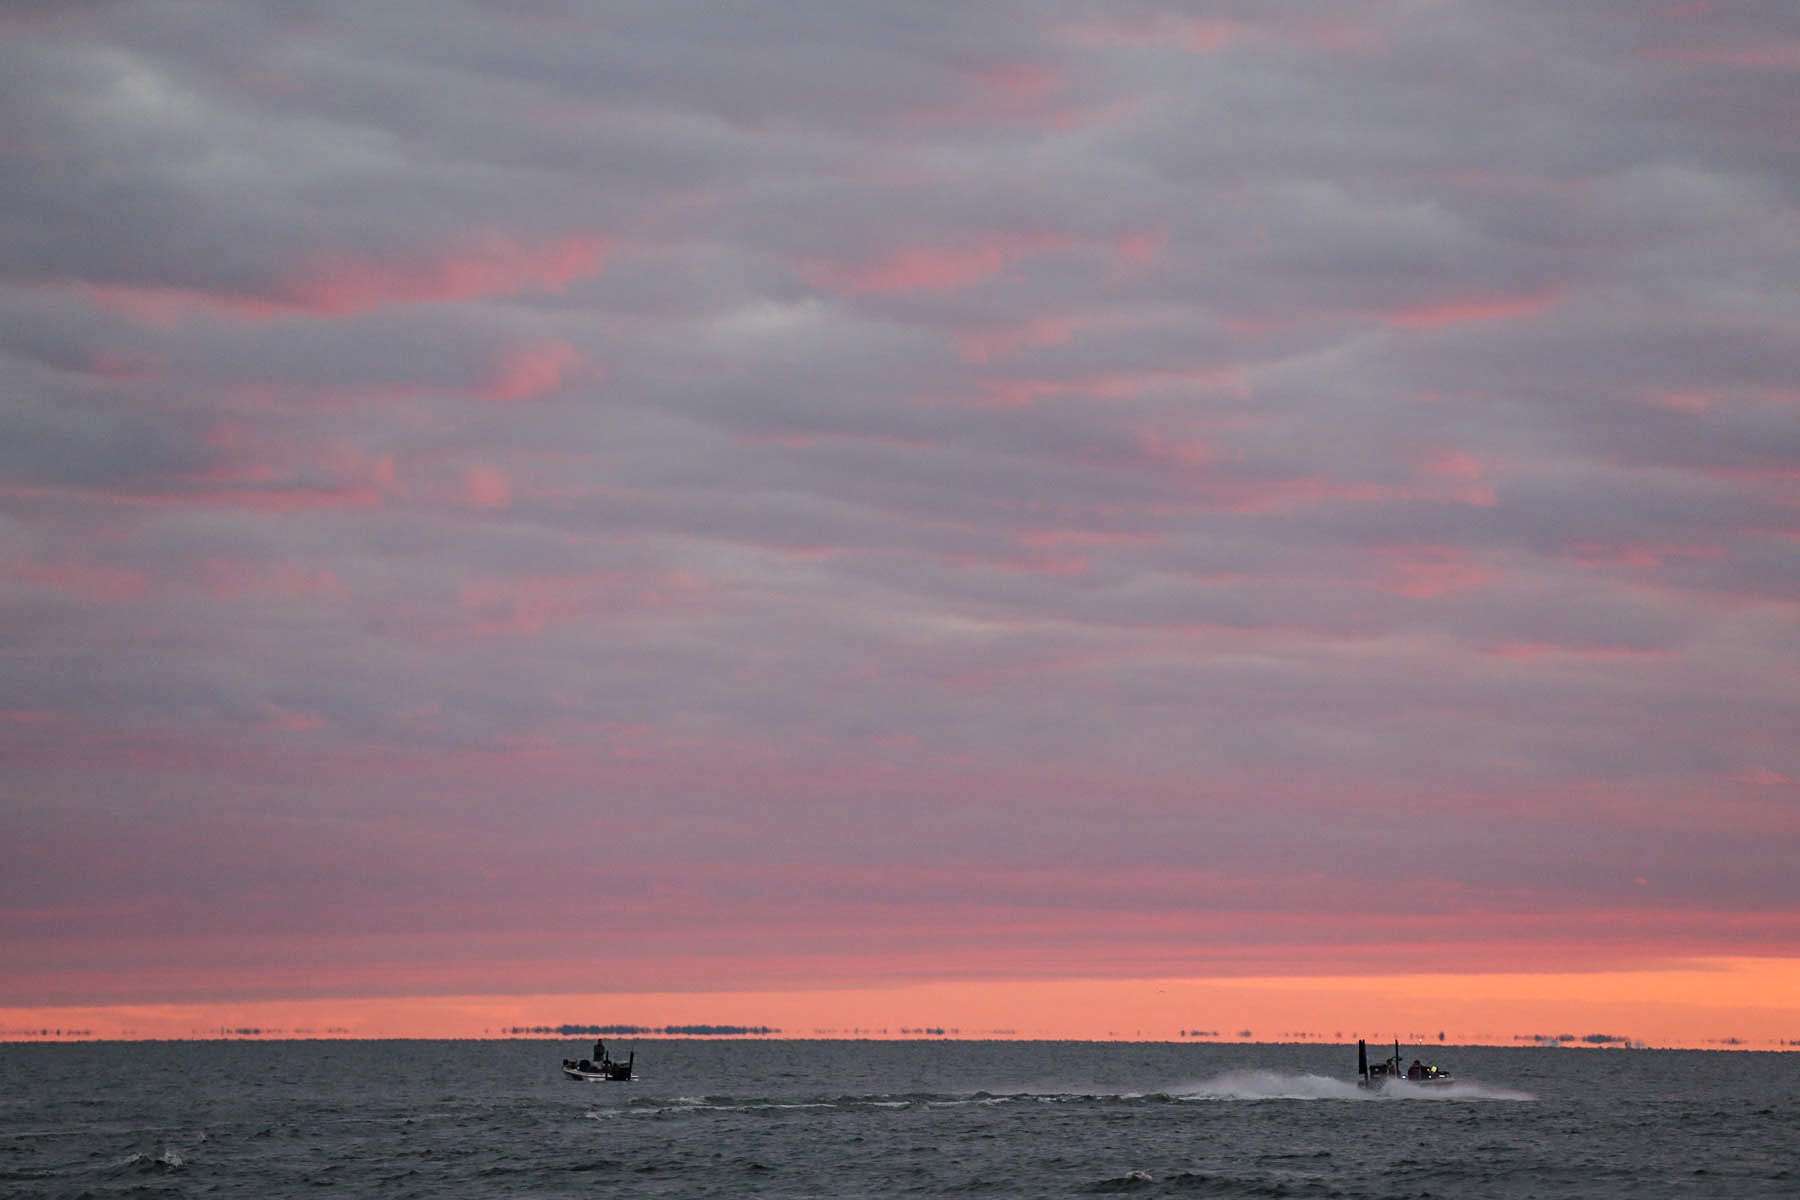 <h4>1. Mille Lacs Lake, Minnesota </h4>
[132,516 acres] The Toyota Bassmaster Angler of the Year Championship was held on this great body of water, and it really shined. Each of the Top 5 anglers averaged north of 20 pounds per day, with Seth Feider topping the field with a three-day total of 76-5 (more than 25-pound per day average). There were 94 limits over 20 pounds weighed in this tournament! Research reveals that about half of the bass in this fishery measure longer than 17 inches, with 10 percent surpassing 20 inches. That means there are a lot of burly fish swimming around. But thatâs not the best of the available data: 30-pound stringers were weighed during all five 2016 Minnesota Tournament Trail stops at the lake, with two five-bass limits breaking the 36-pound mark. Remember, these are all smallmouth! A Cabelaâs Team Tournament stop in August required 20 pounds just to make the Top 12, with the big bass weighing an ounce shy of 6 pounds â so you can average 5-pounders pretty easily. If ever you wanted to catch the smallmouth of a lifetime and the biggest 5-pound smallmouth limit of your life, head to Mille Lacs!
